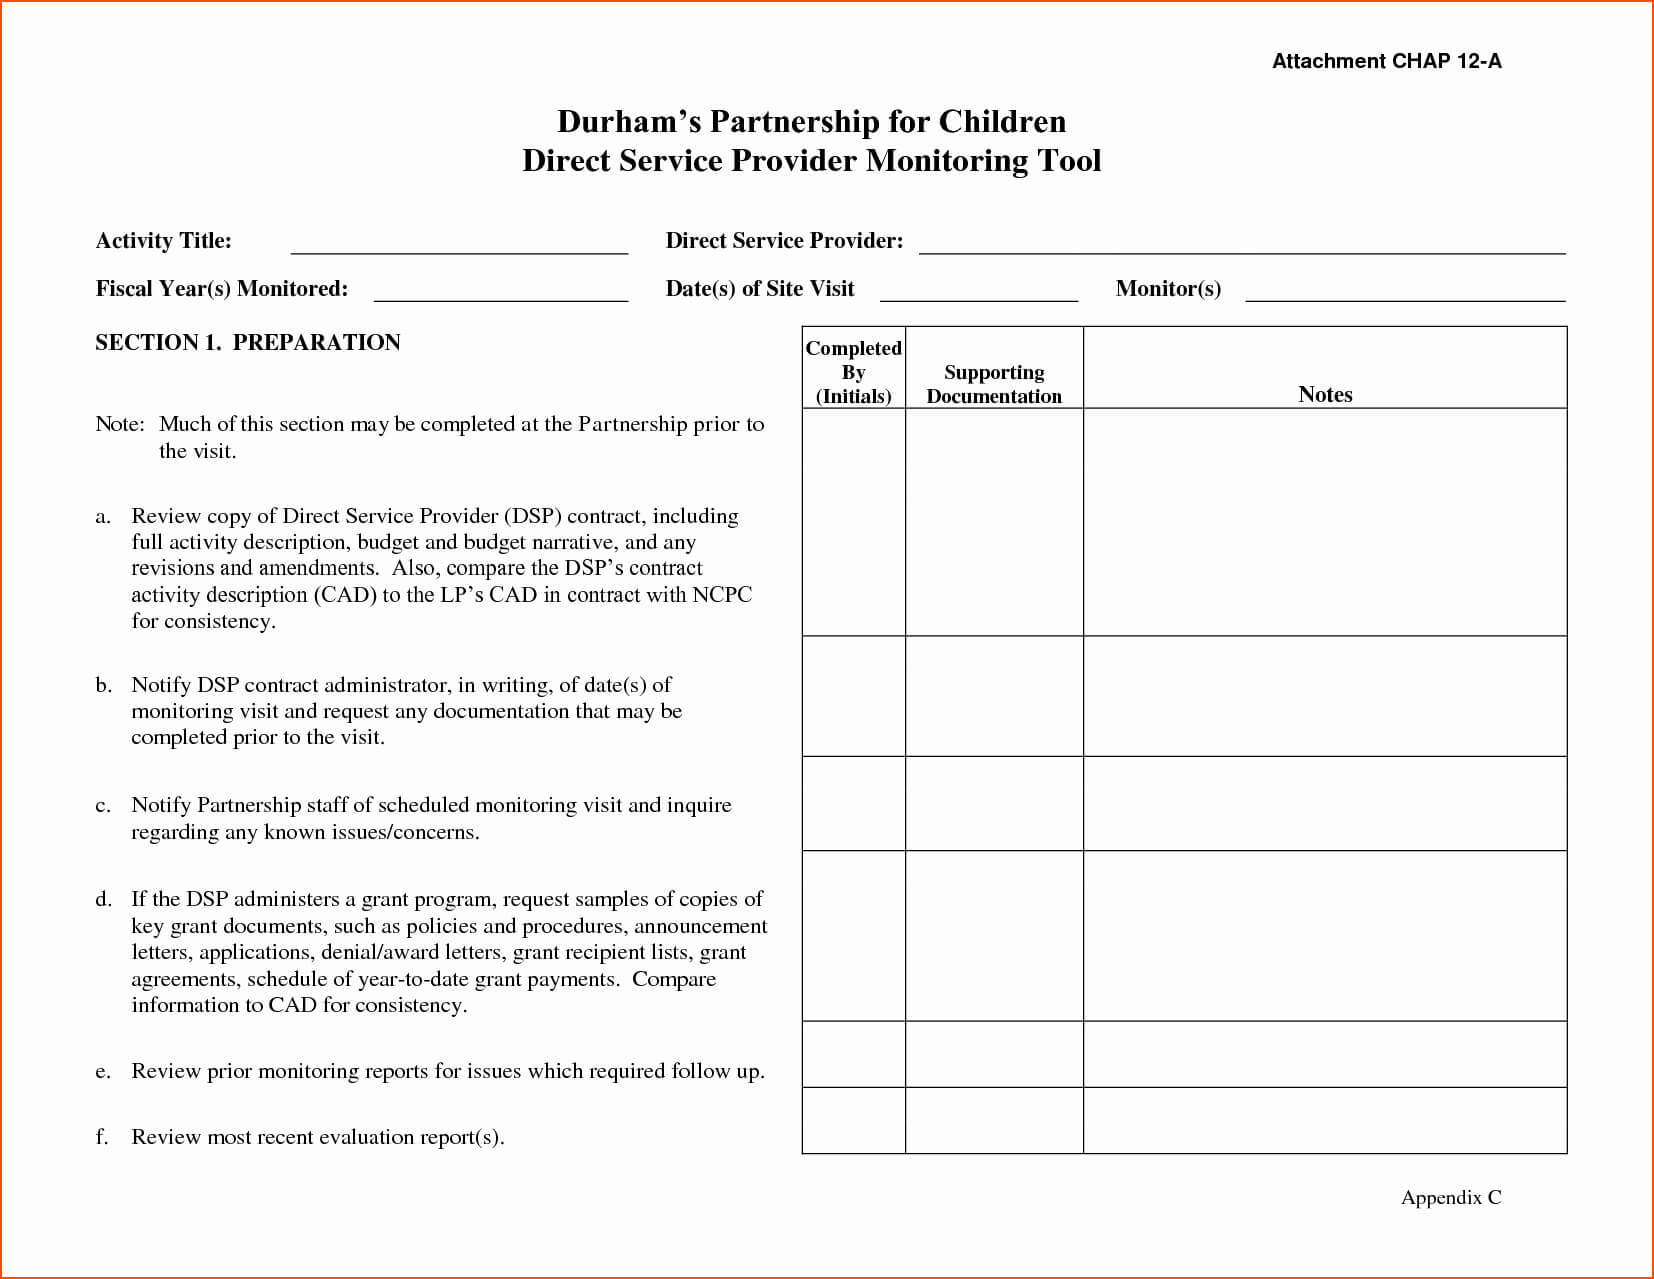 045 Daily Activity Report Template Ideas Weekly Throughout Daily Activity Report Template